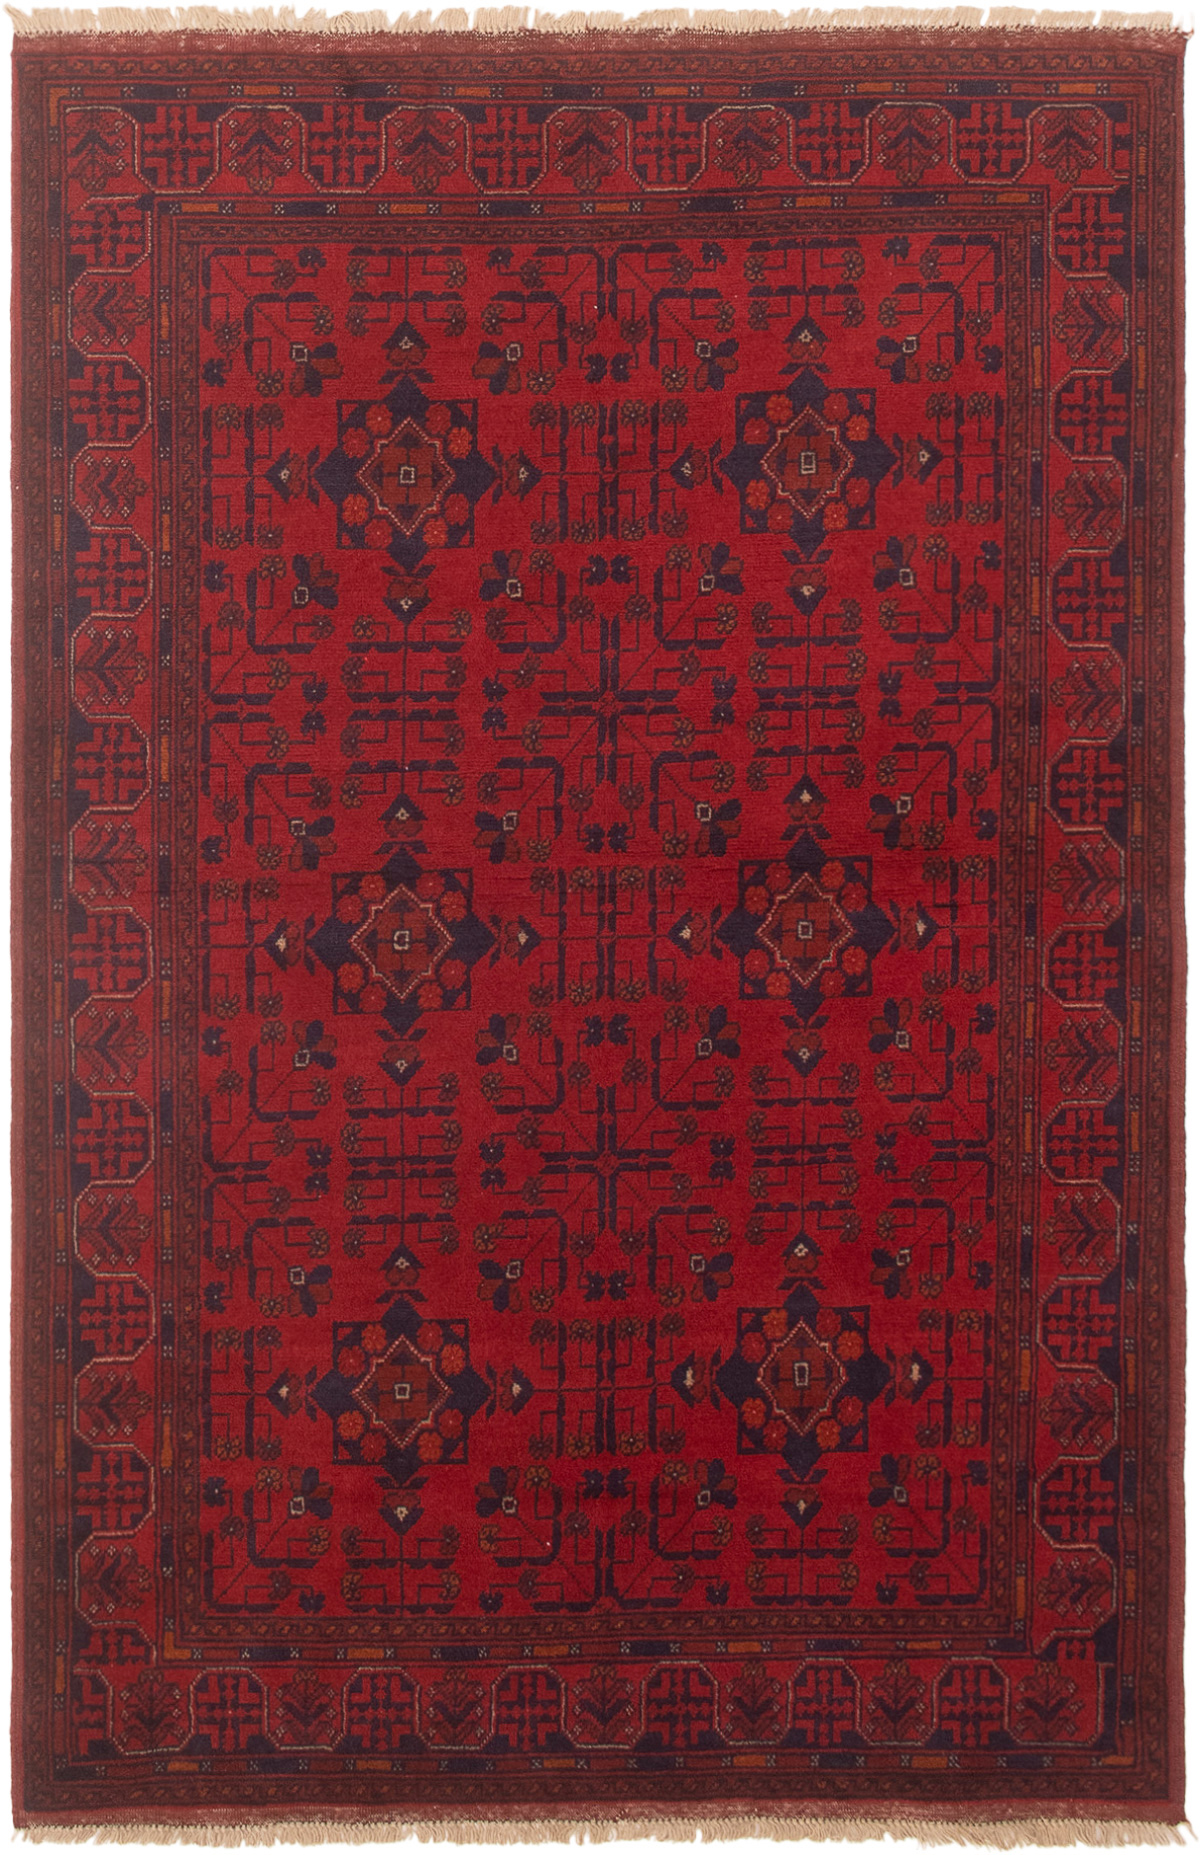 Hand-knotted Finest Khal Mohammadi Red Wool Rug 4'2" x 6'4" (14) Size: 4'2" x 6'4"  